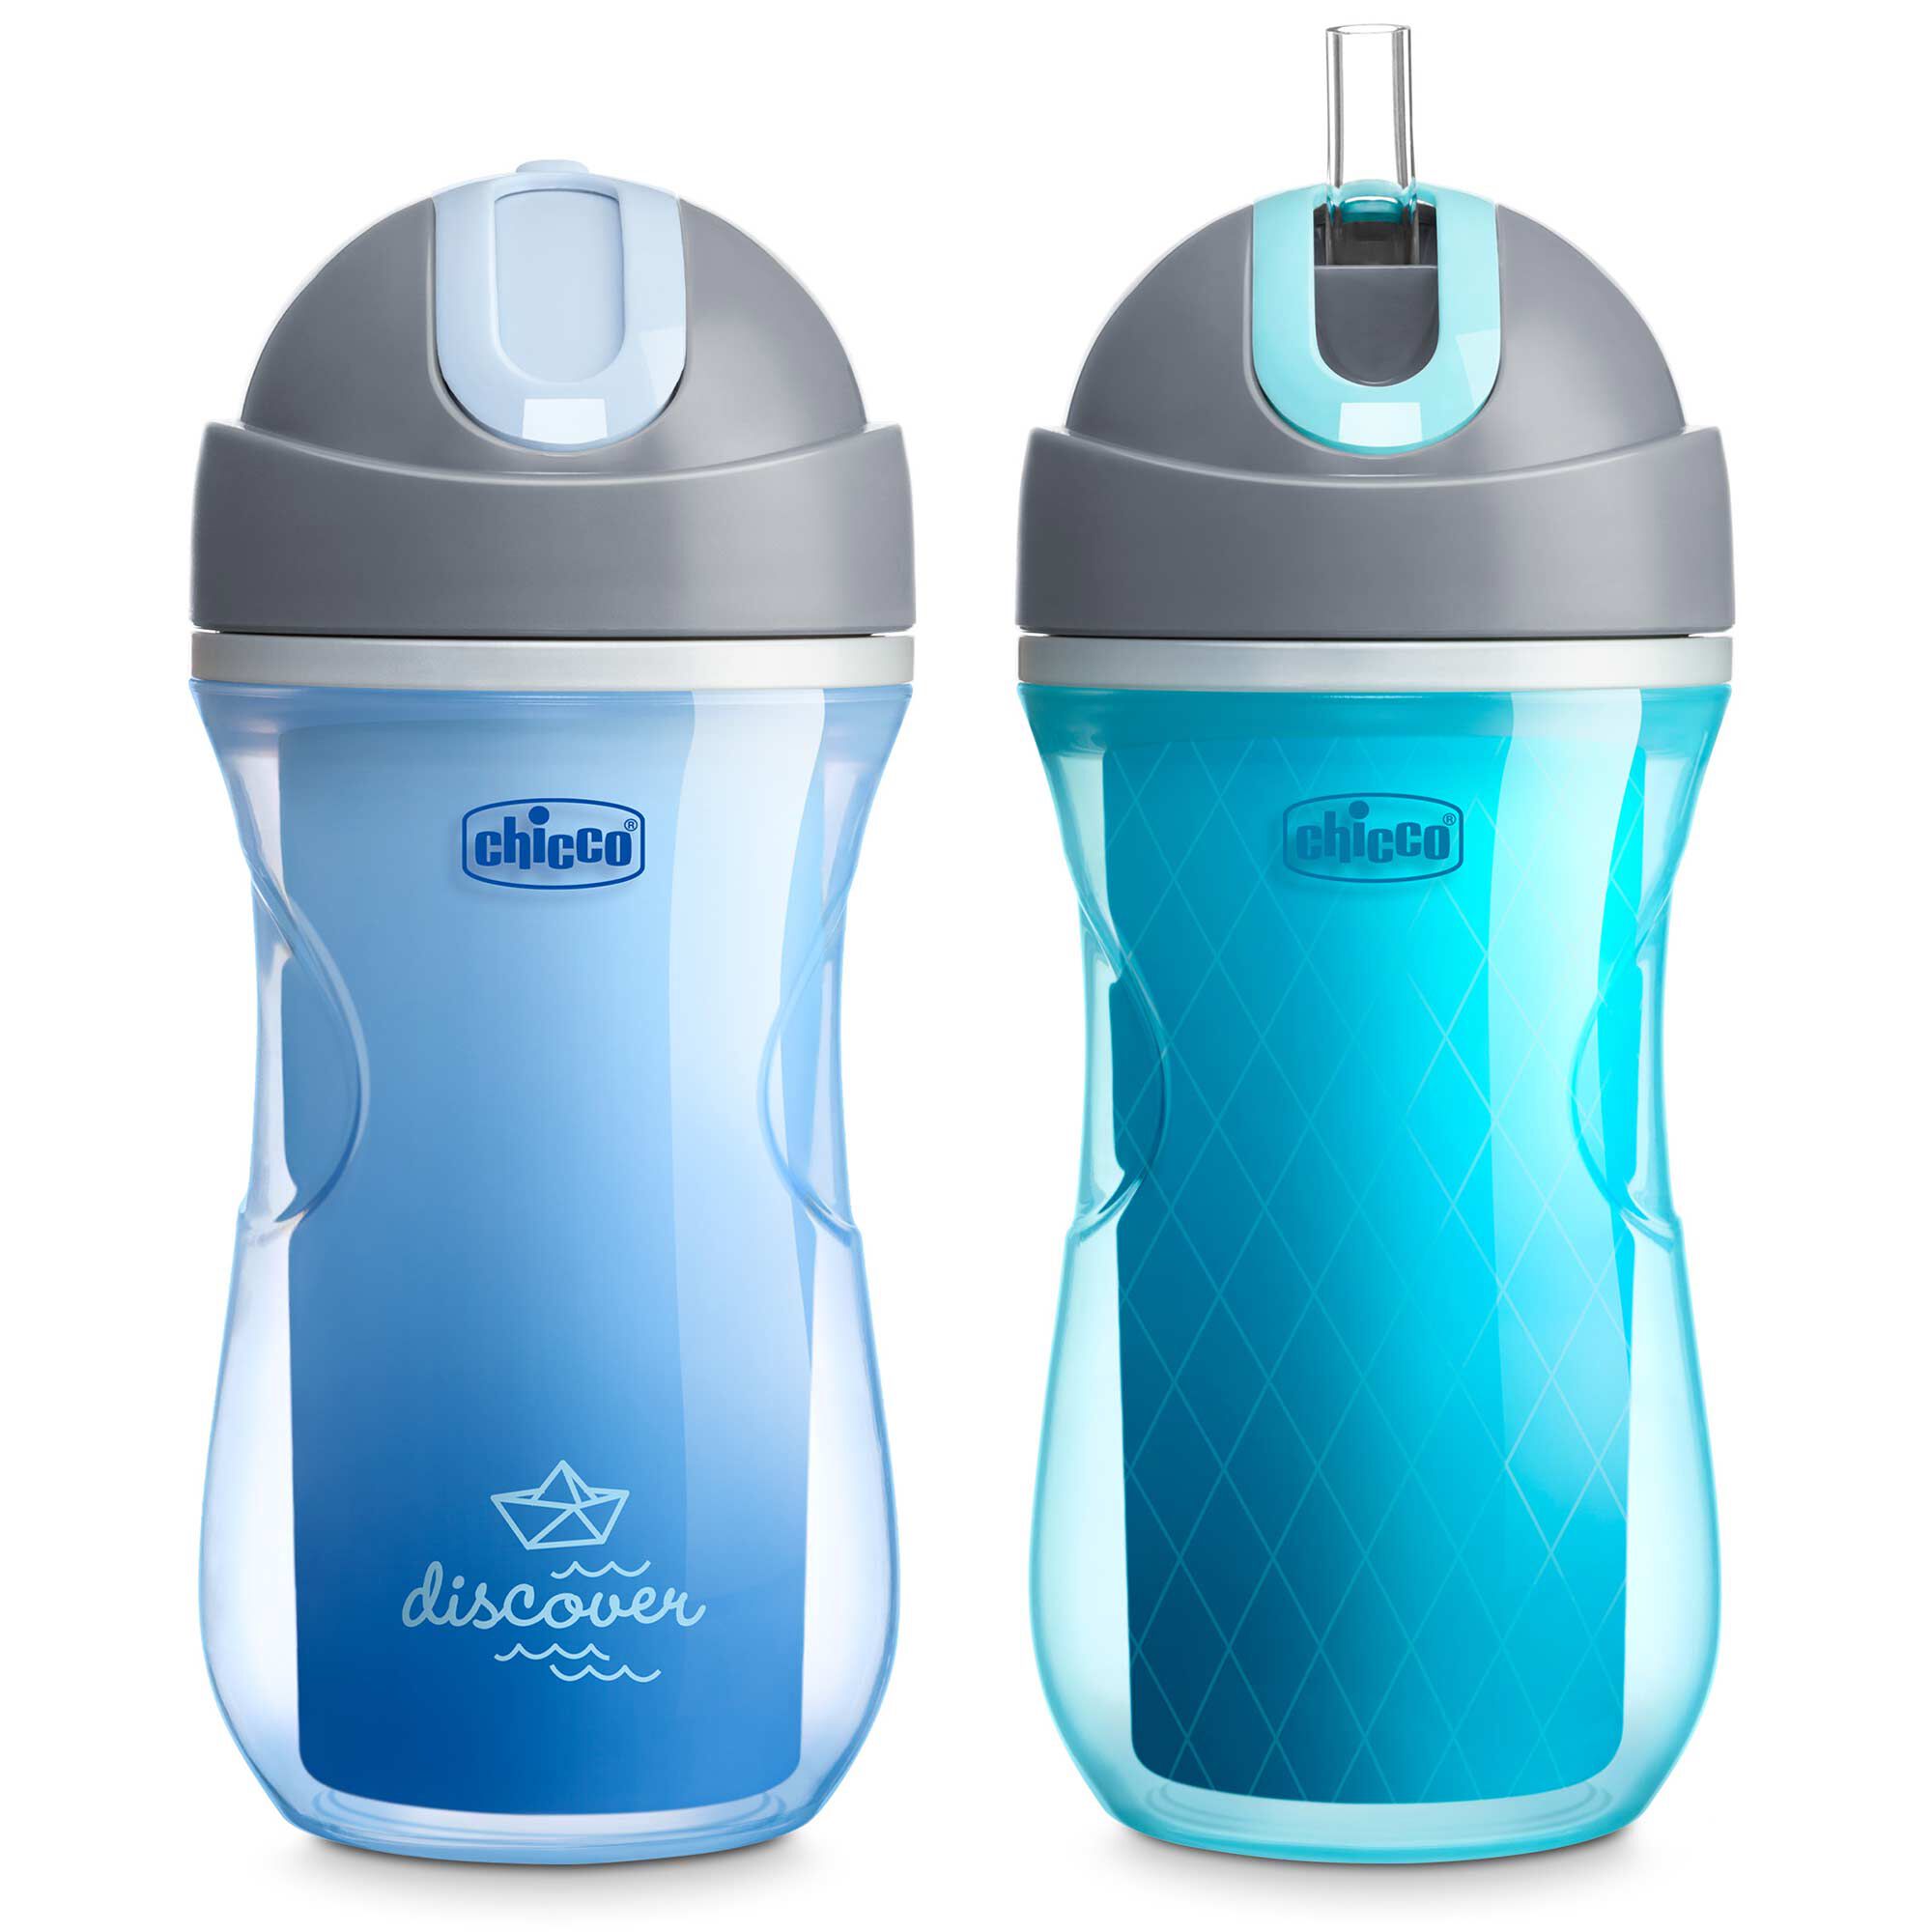 https://www.chiccousa.com/dw/image/v2/AAMT_PRD/on/demandware.static/-/Sites-chicco_catalog/default/dw7cc2d306/images/products/feeding/insulated-flip-top-straw/chicco-insulated-flip-top-straw-cup-blue-discover-teal.jpg?sw=2000&sh=2000&sm=fit